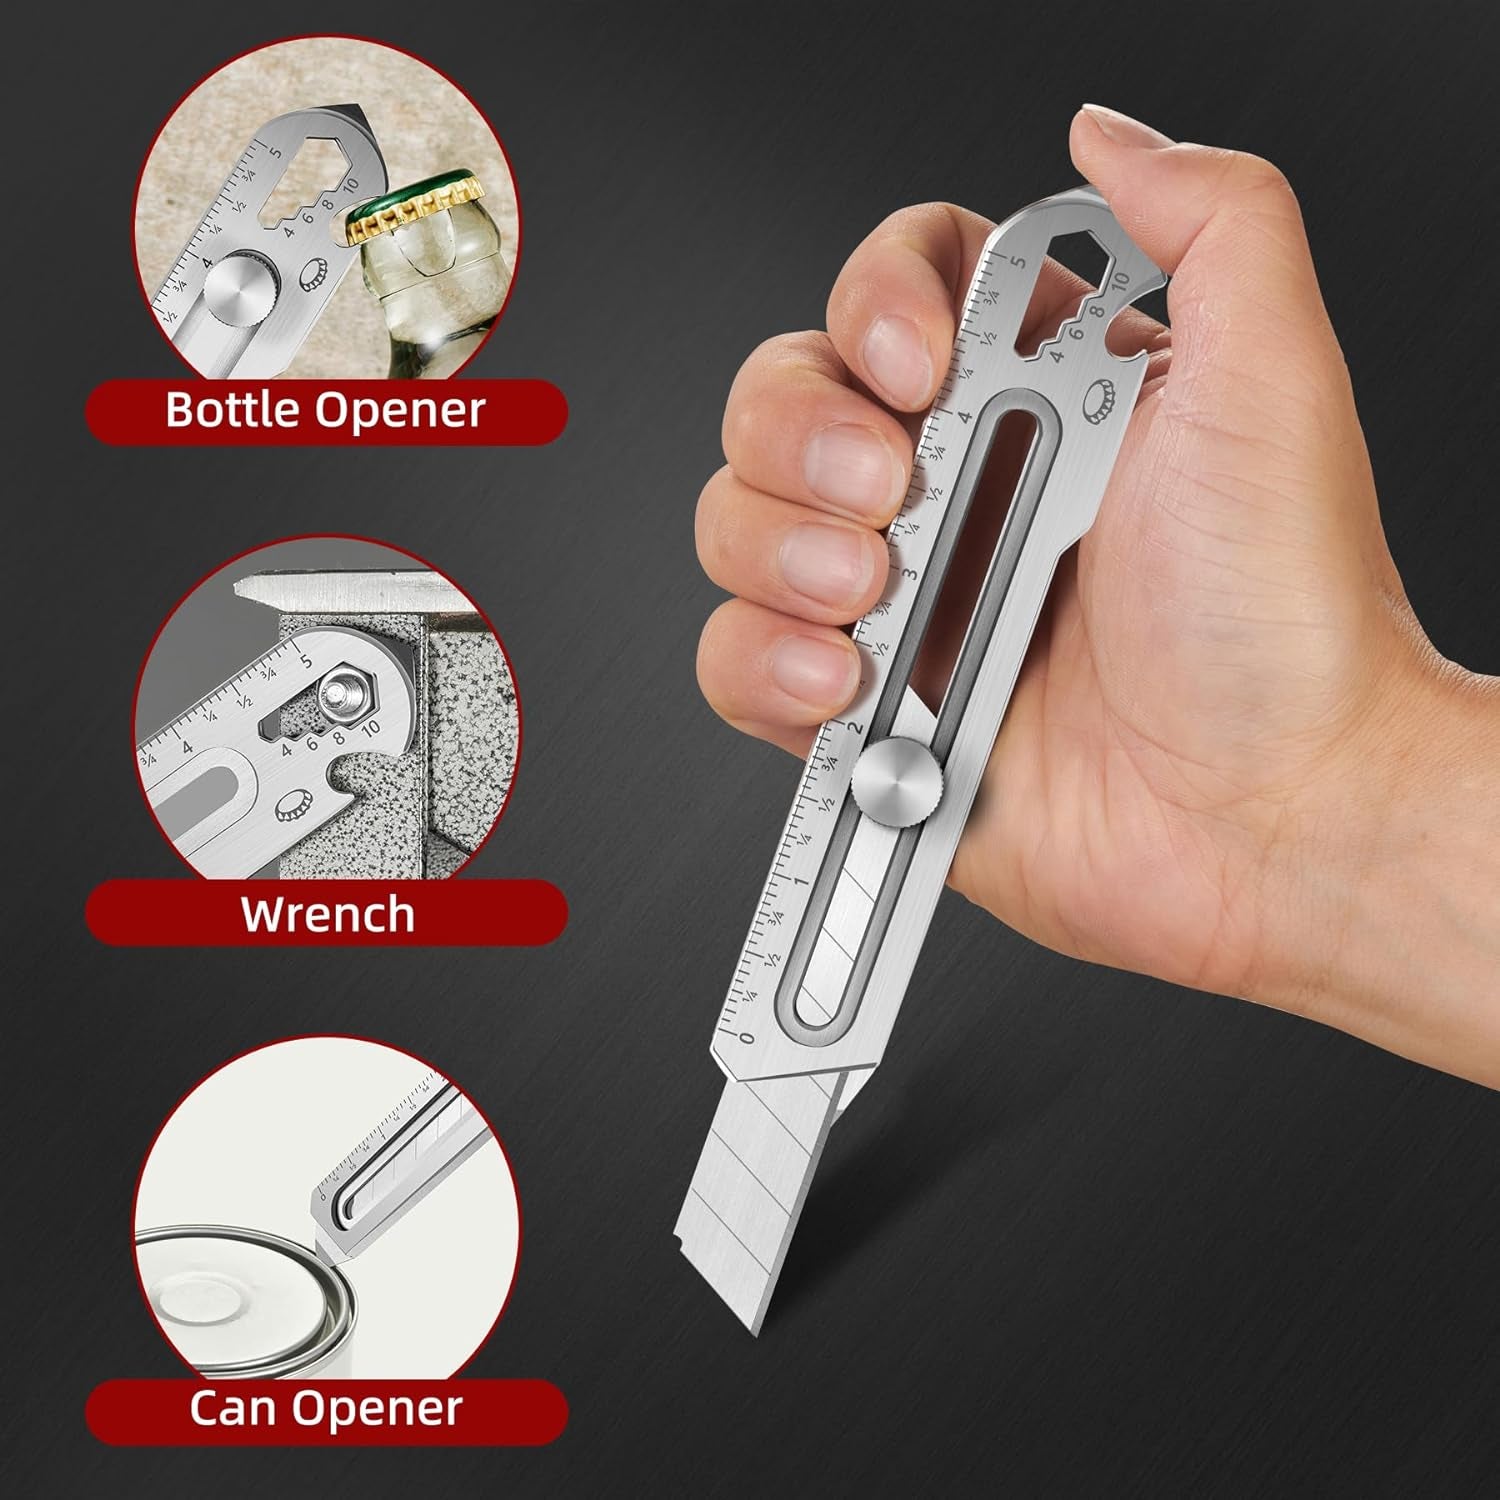 7-In-1 Mutipurpose Utility Knife, Stainless Steel Retractable Box Cutter, Heavy Duty Snap off Cutter Knife with 10PC 18MM SK5 Blades, Safety Lock Design